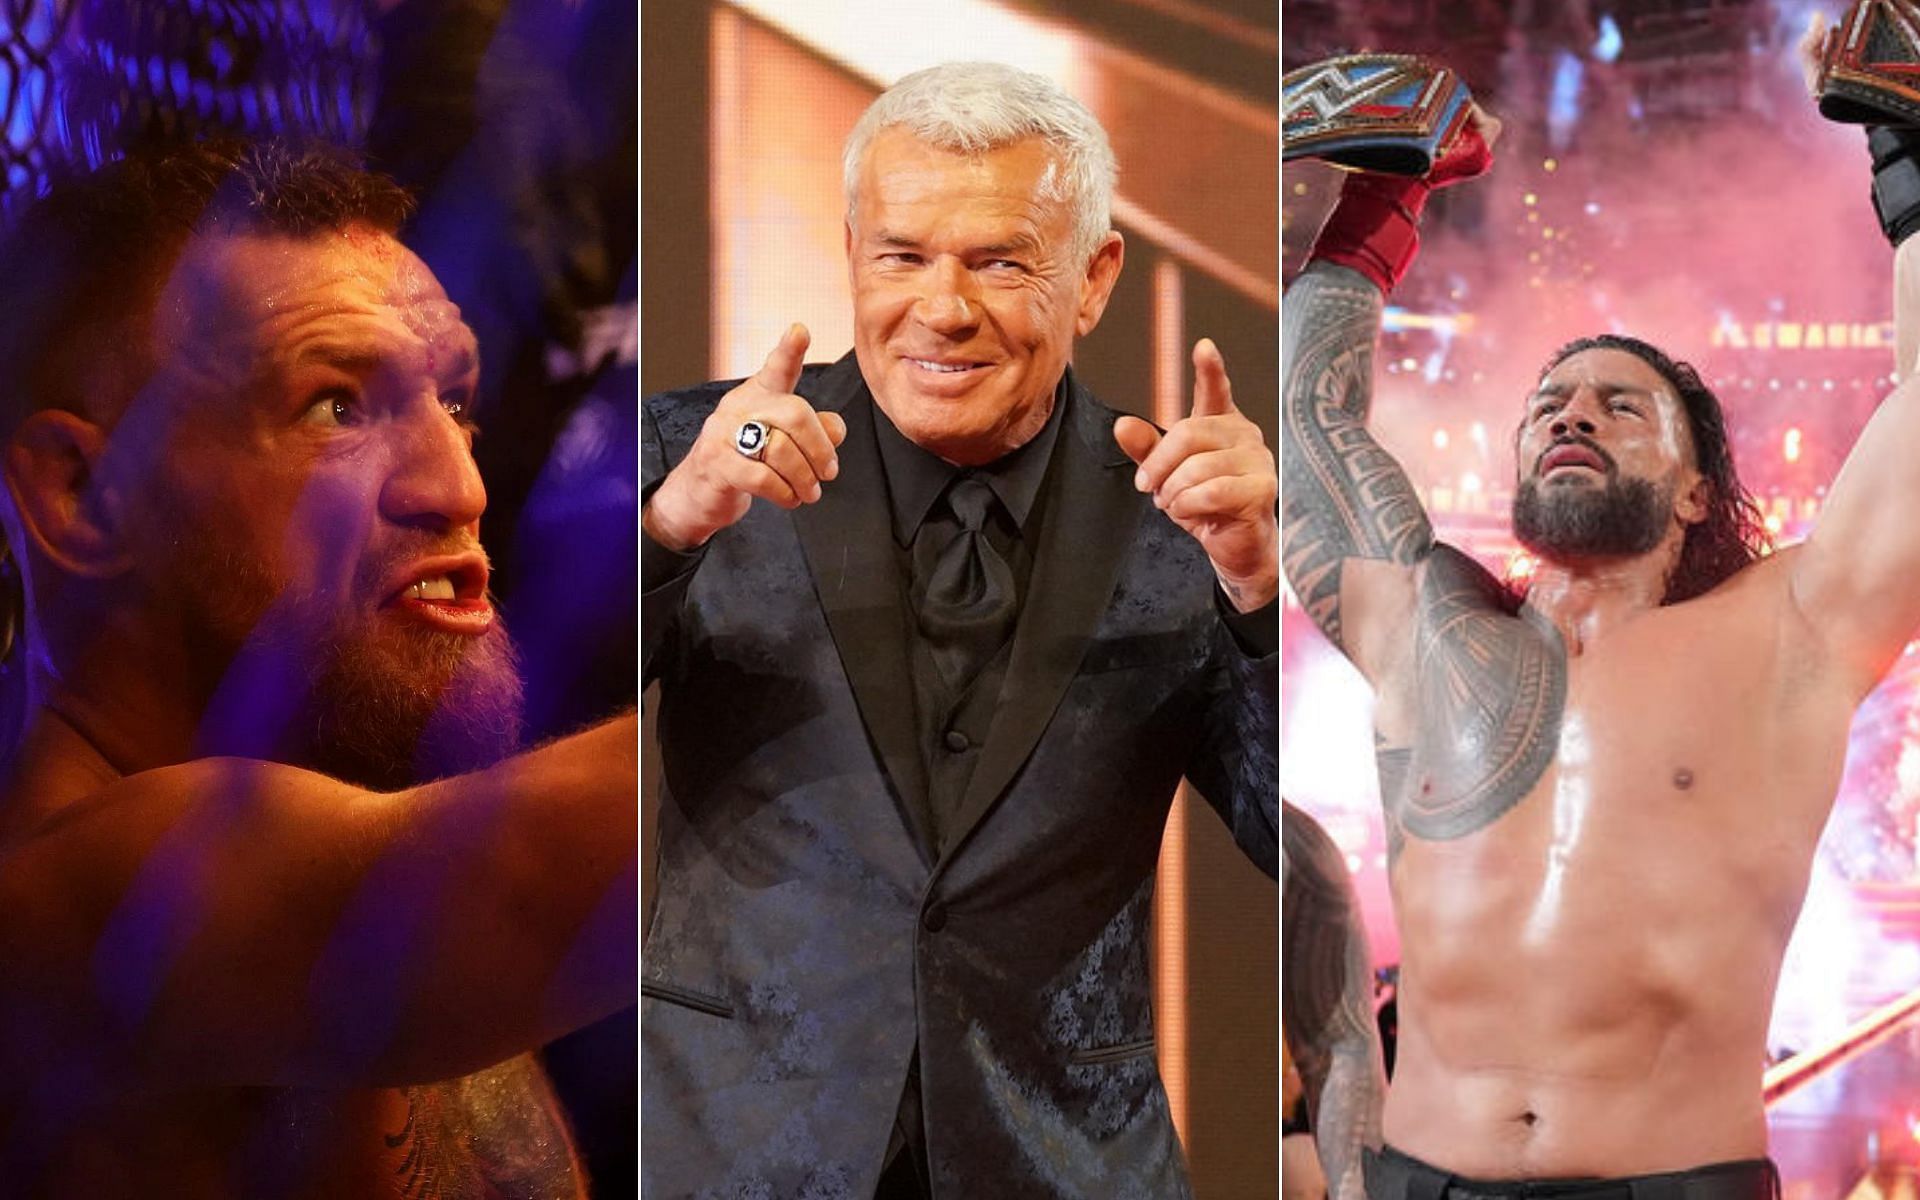 Conor McGregor [Left], Eric Bischoff [Middle], and Roman Reigns [Right] [Photo credit: wwe.com] 